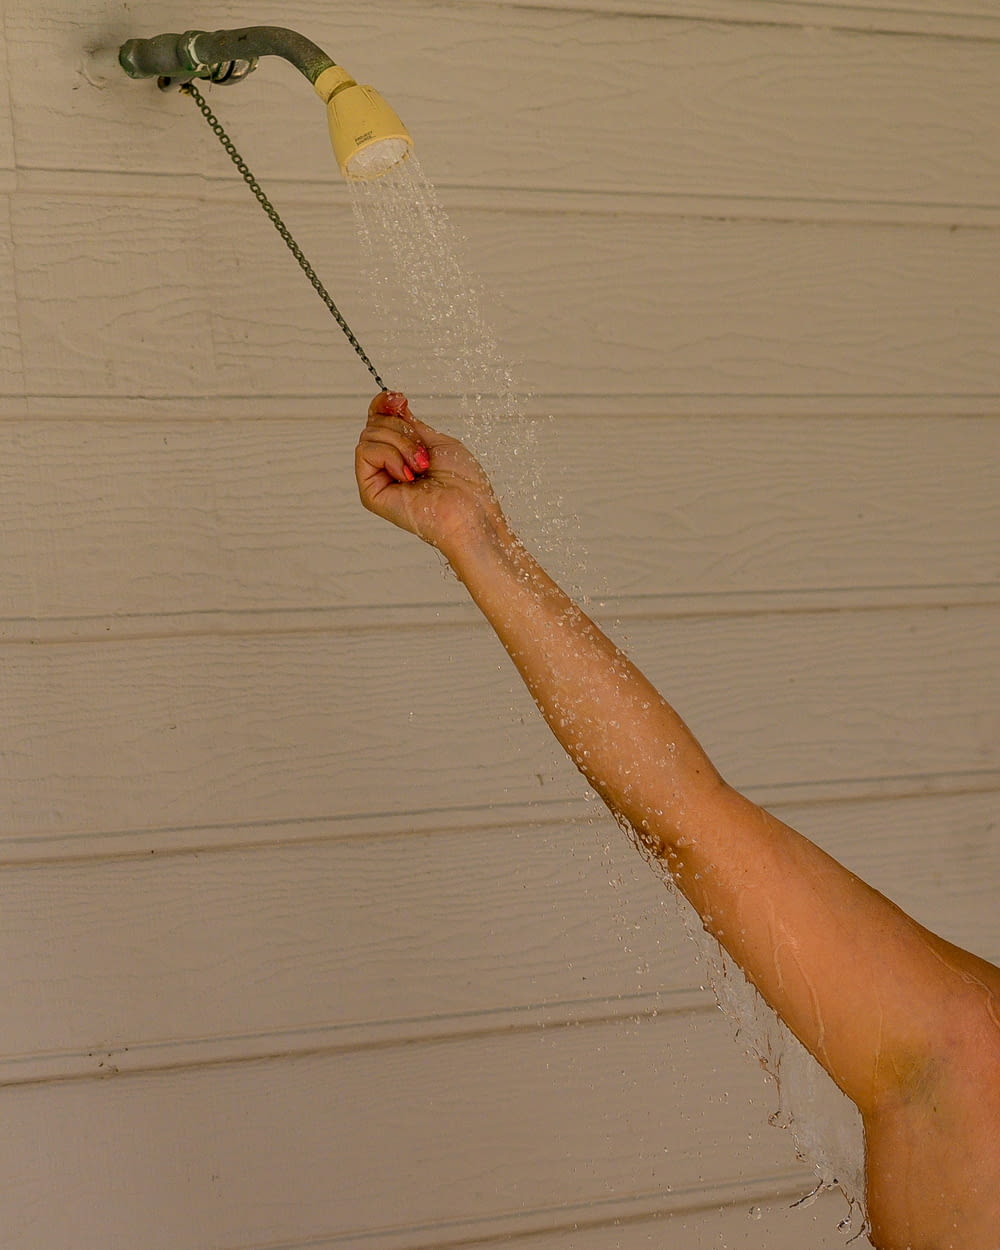 a person is spraying water from a shower head